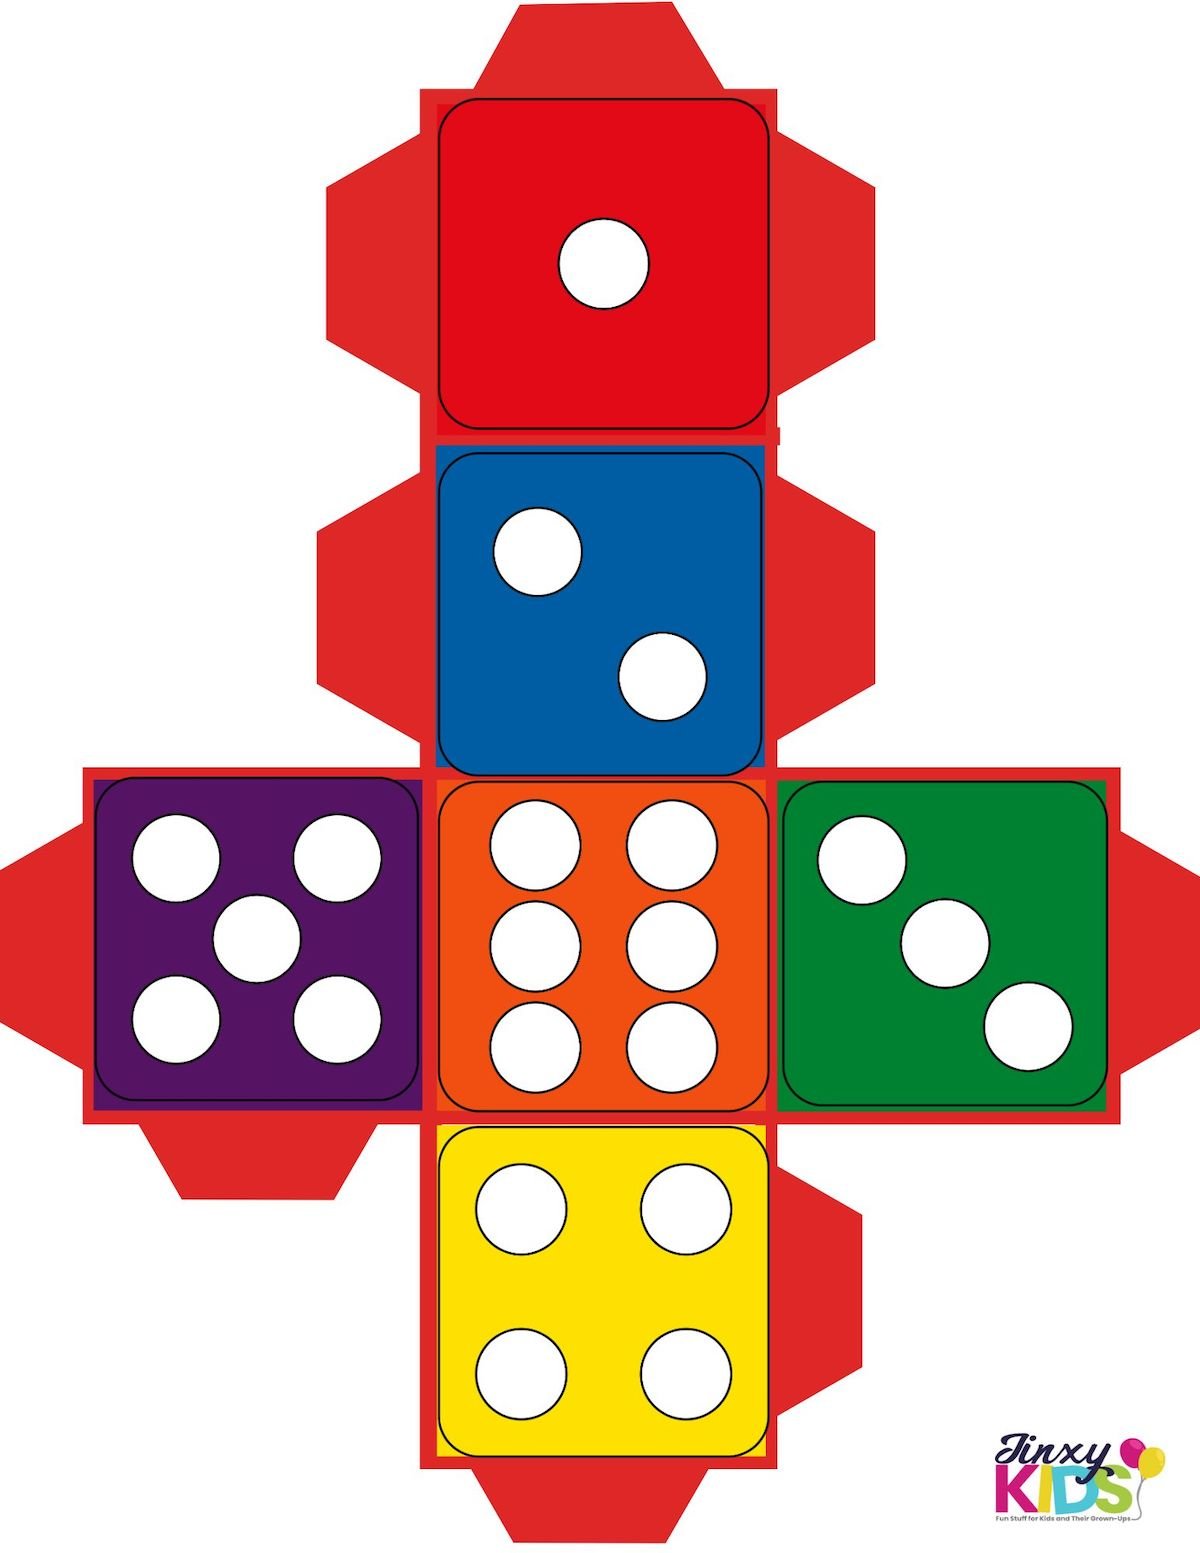 Roll a Gingerbread Man Game printable dice template.